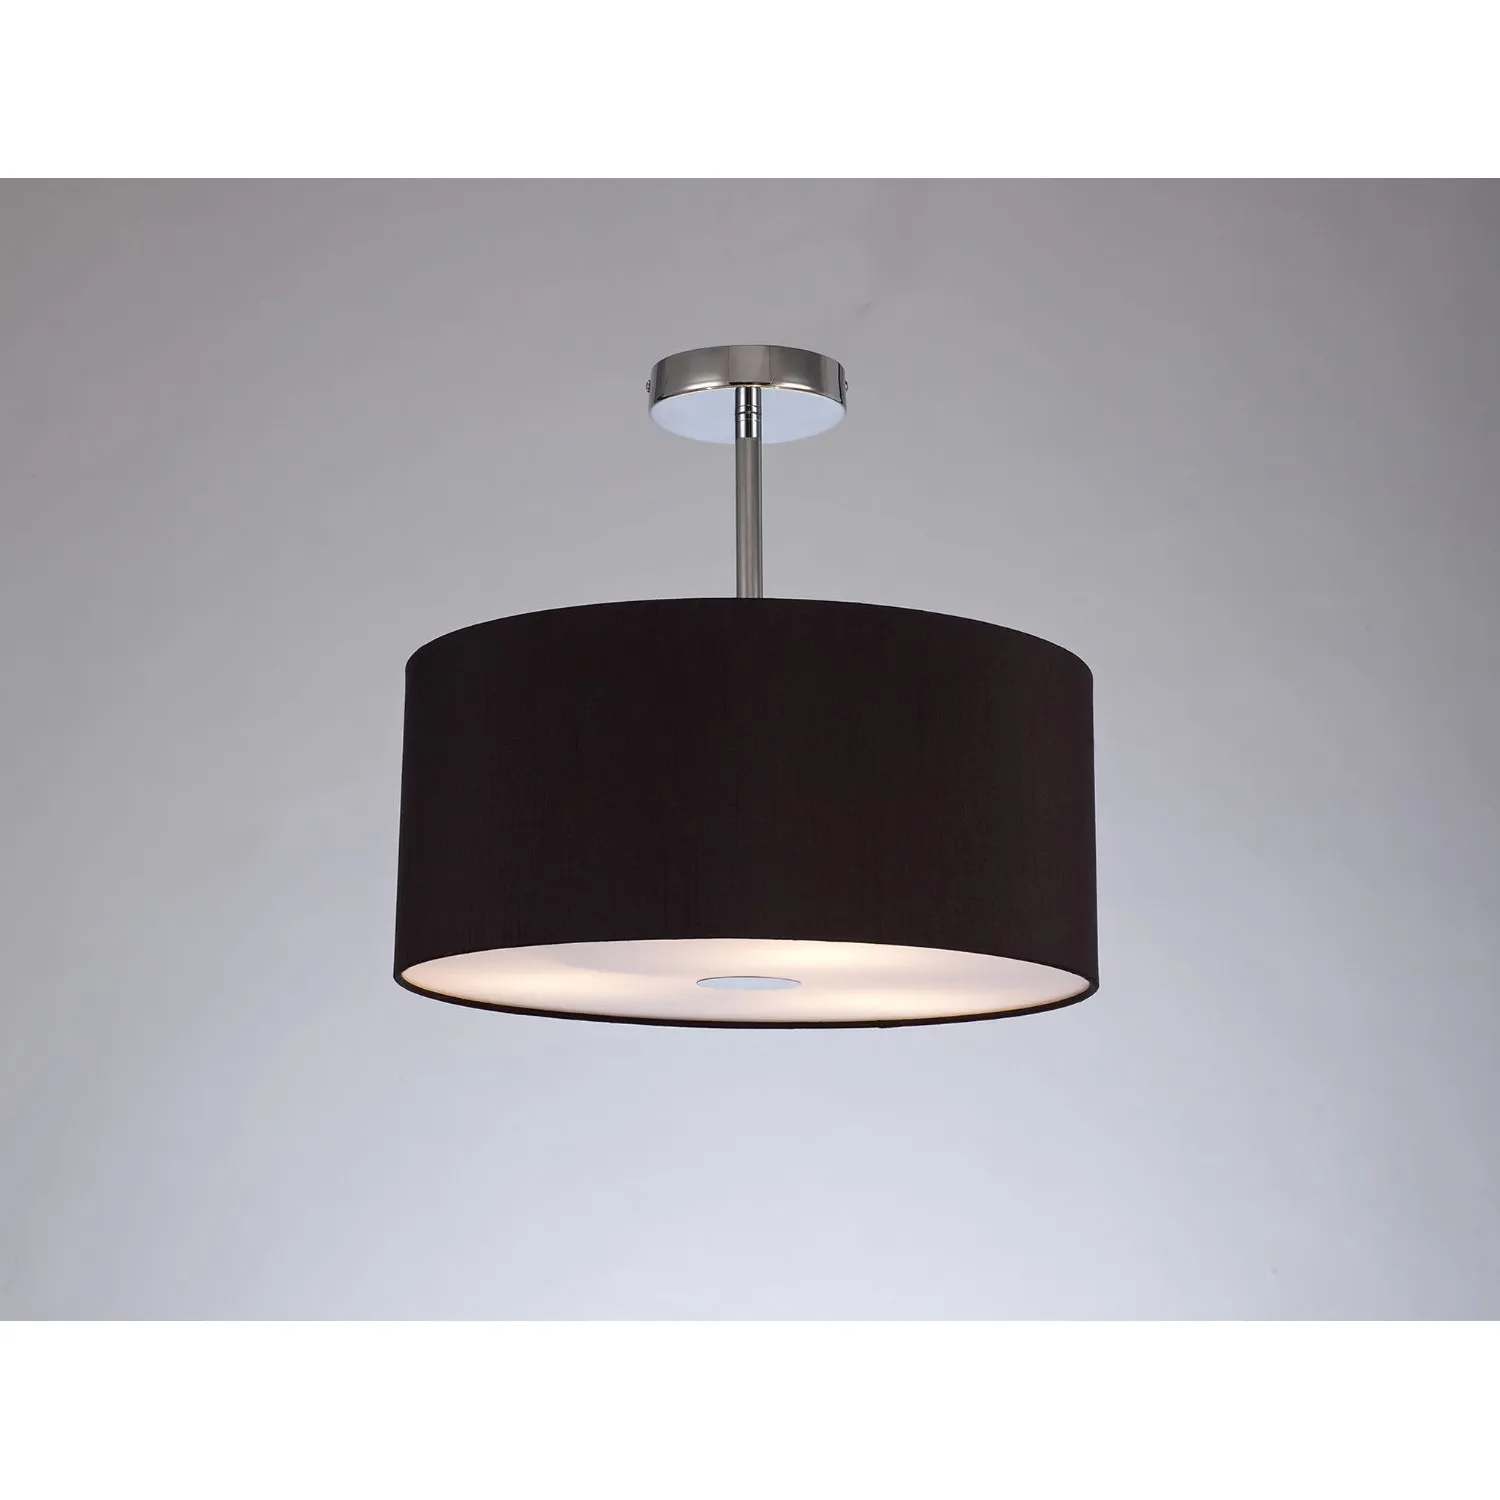 Baymont Polished Chrome 3 Light E27 Semi Flush c w 400 Dual Faux Silk Fabric Shade, Black Green Olive And 400mm Frosted PC Acrylic Diffuser